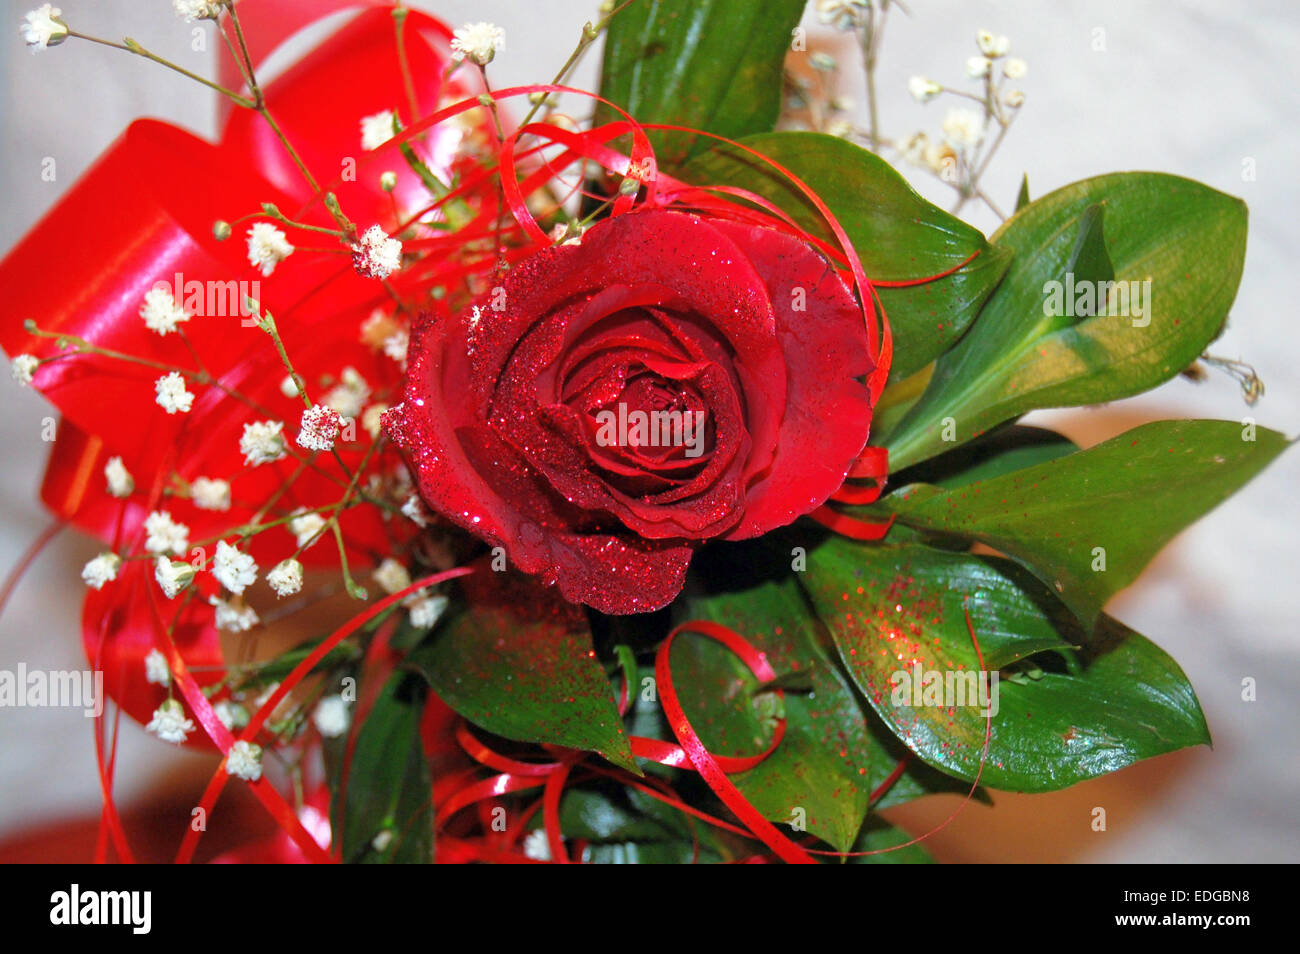 Red rose in the leaves and decorations. Stock Photo